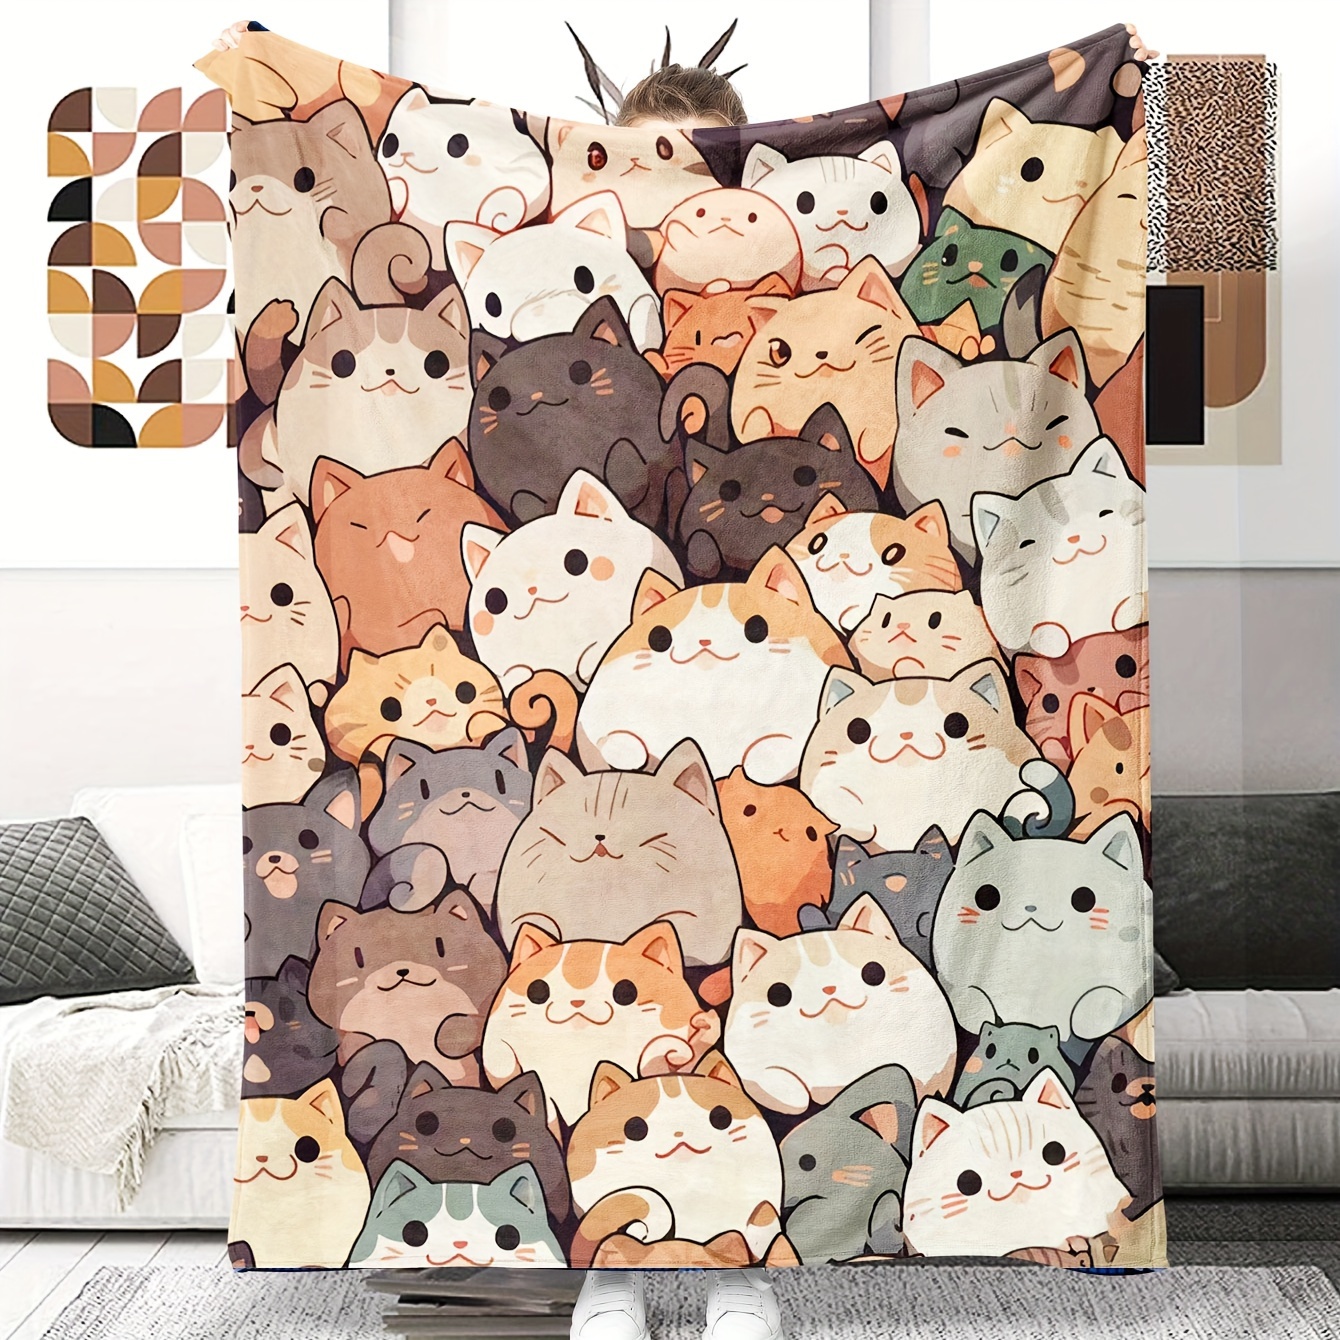 

1pc Cat Printed Throw Blanket, Flannel Blanket, Soft Blanket For Sofa Couch Office Bed Camping Travelling, Multi-purpose Gift Blanket For All Season